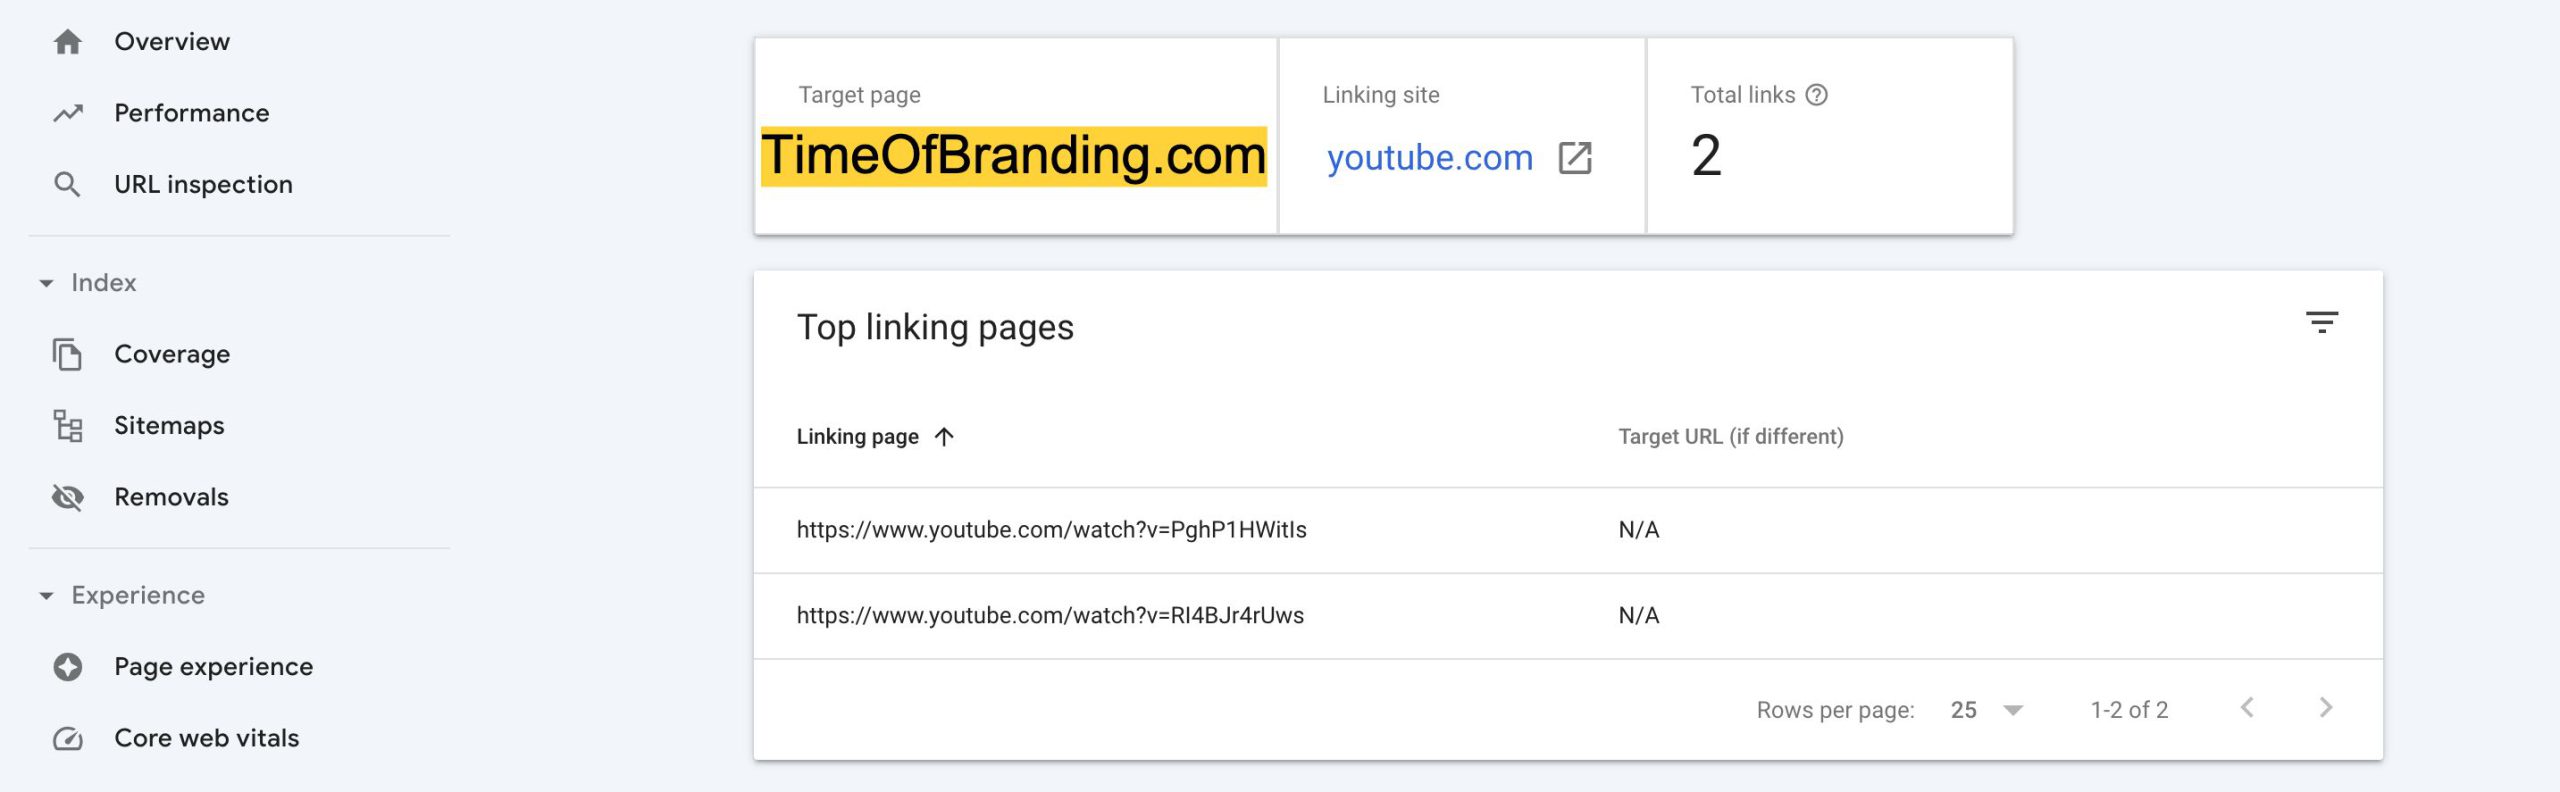 search console : Links / Top linking sites